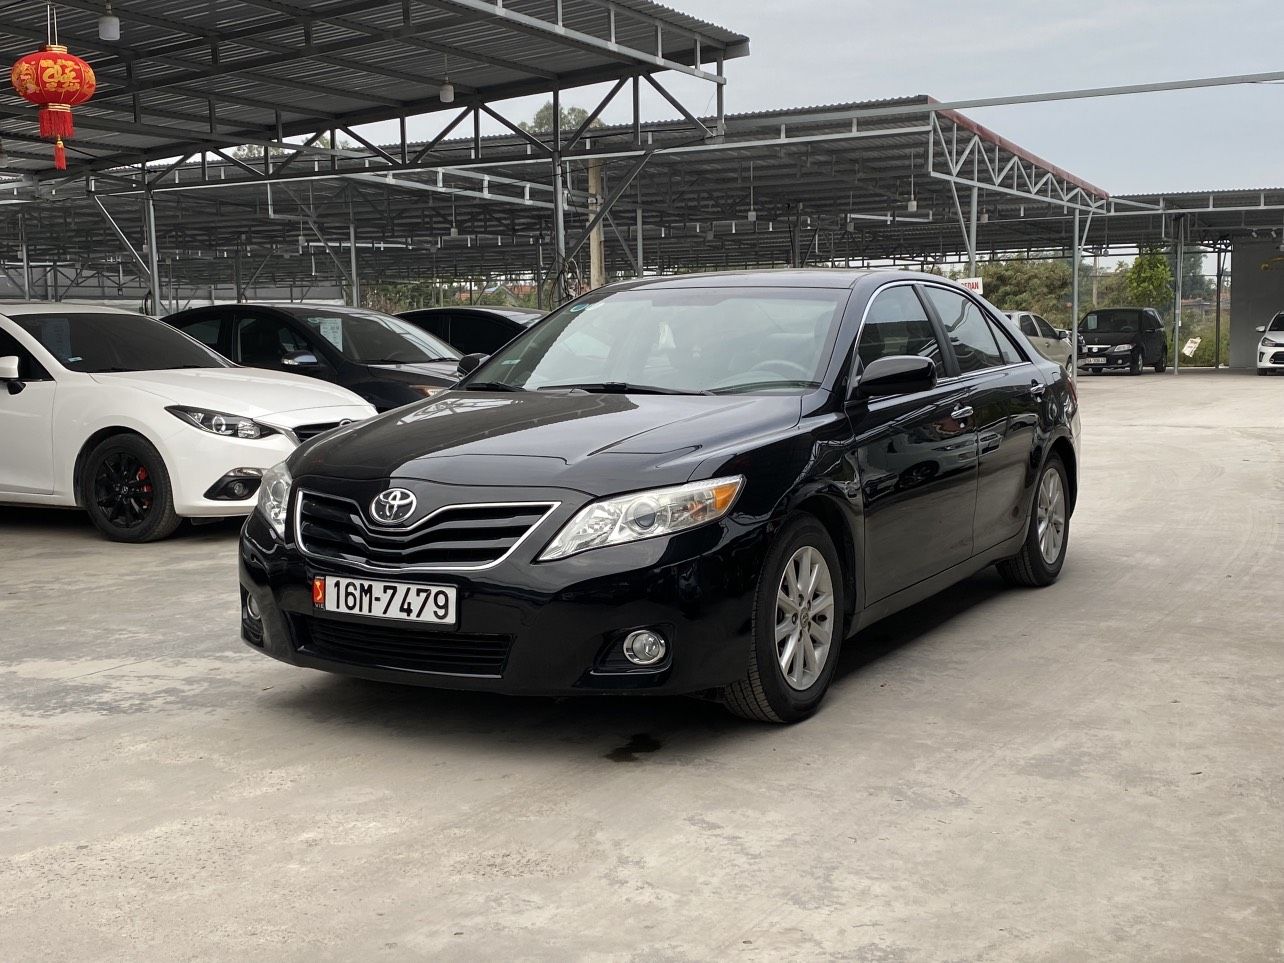 Sold 2009 Toyota Camry SE in Glendale